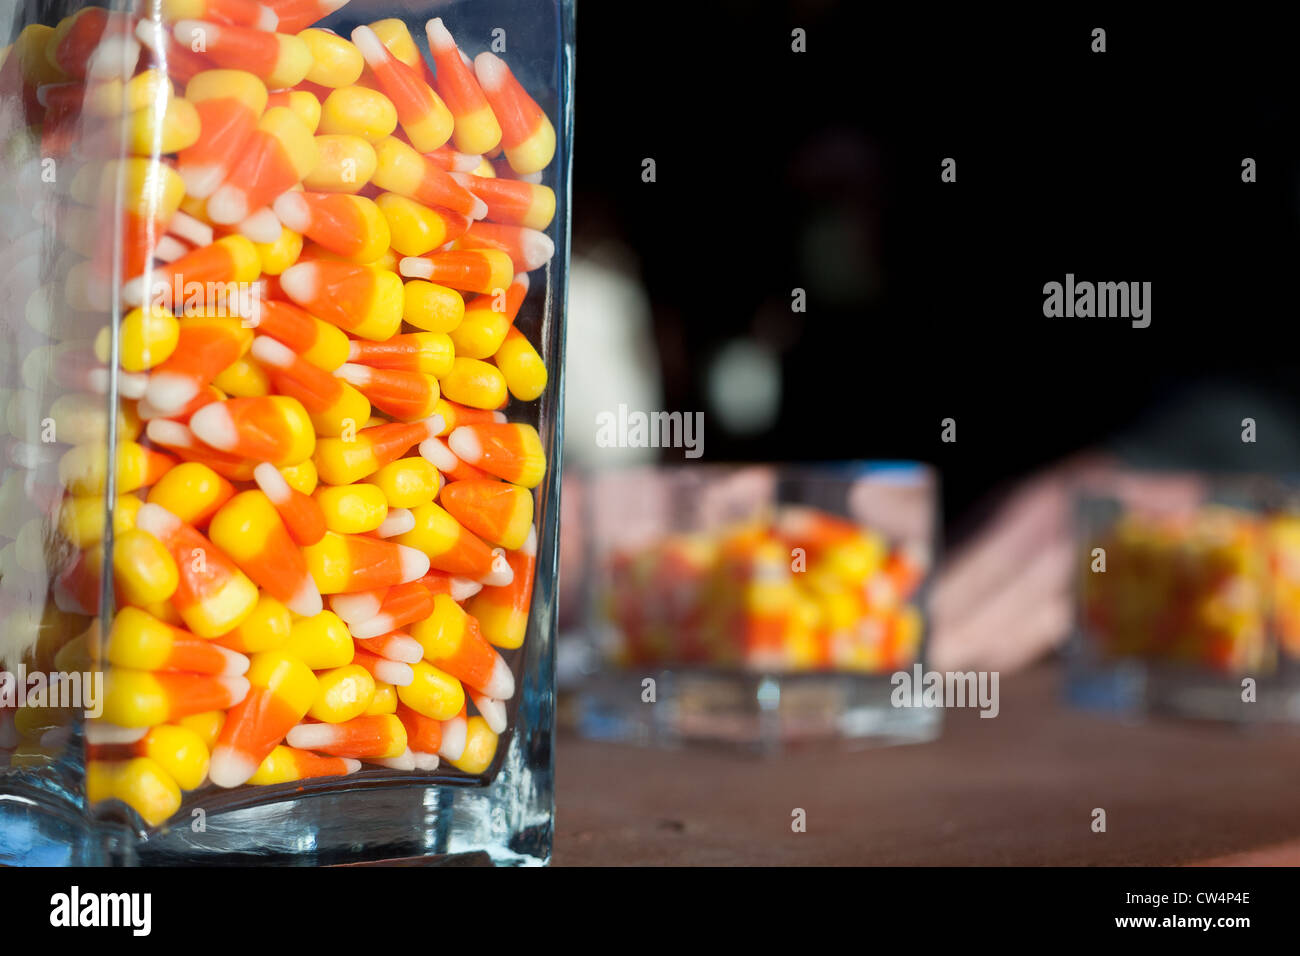 3 jars of candy corn set out on a table. Stock Photo